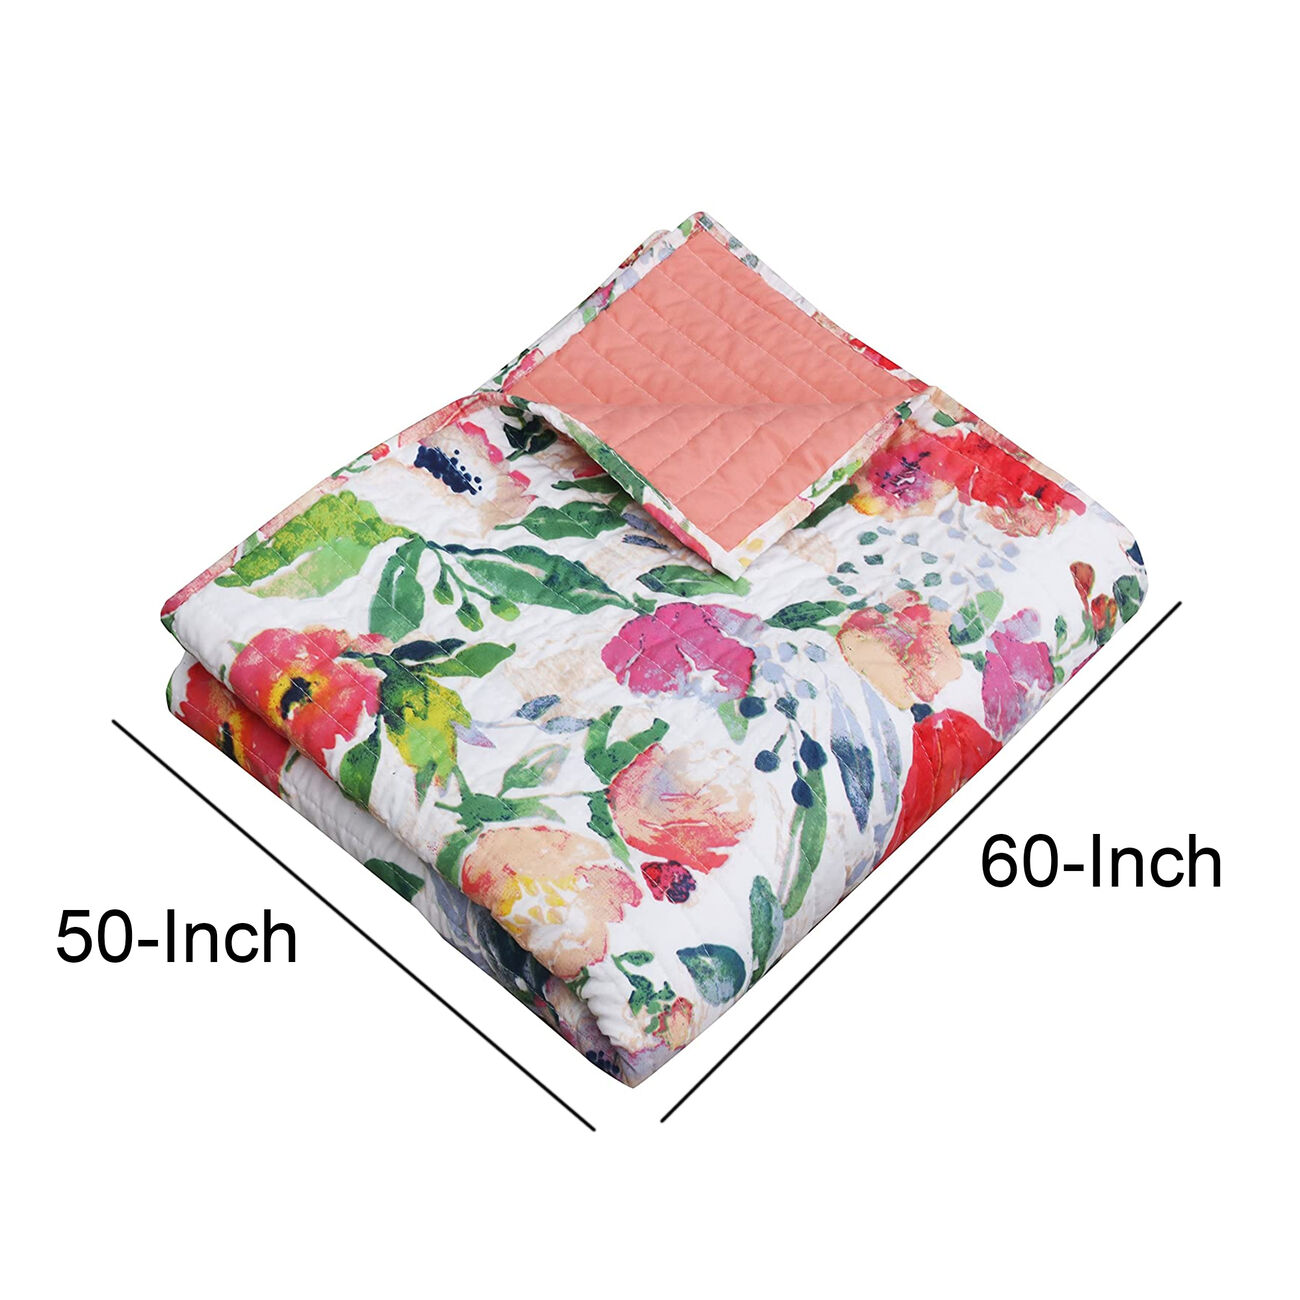 60 x 50 Inches Microfiber Quilted Throw with Floral Print, Multicolor